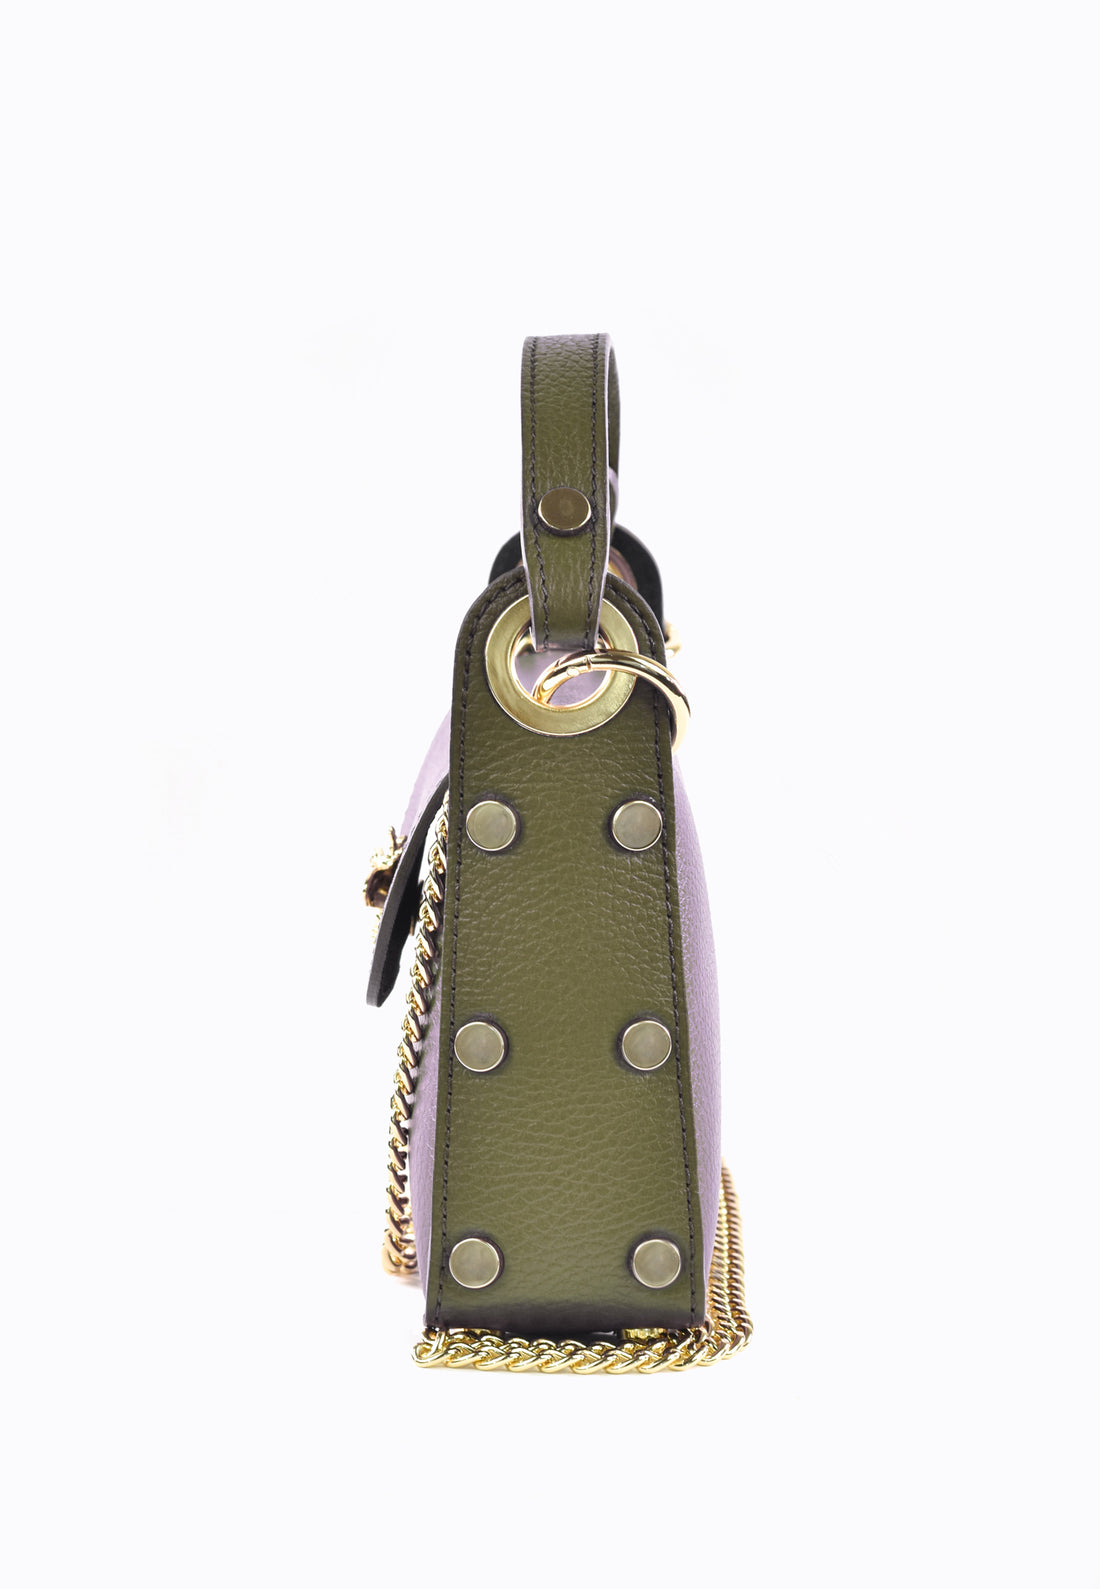 Honey bag in olive green dollar leather